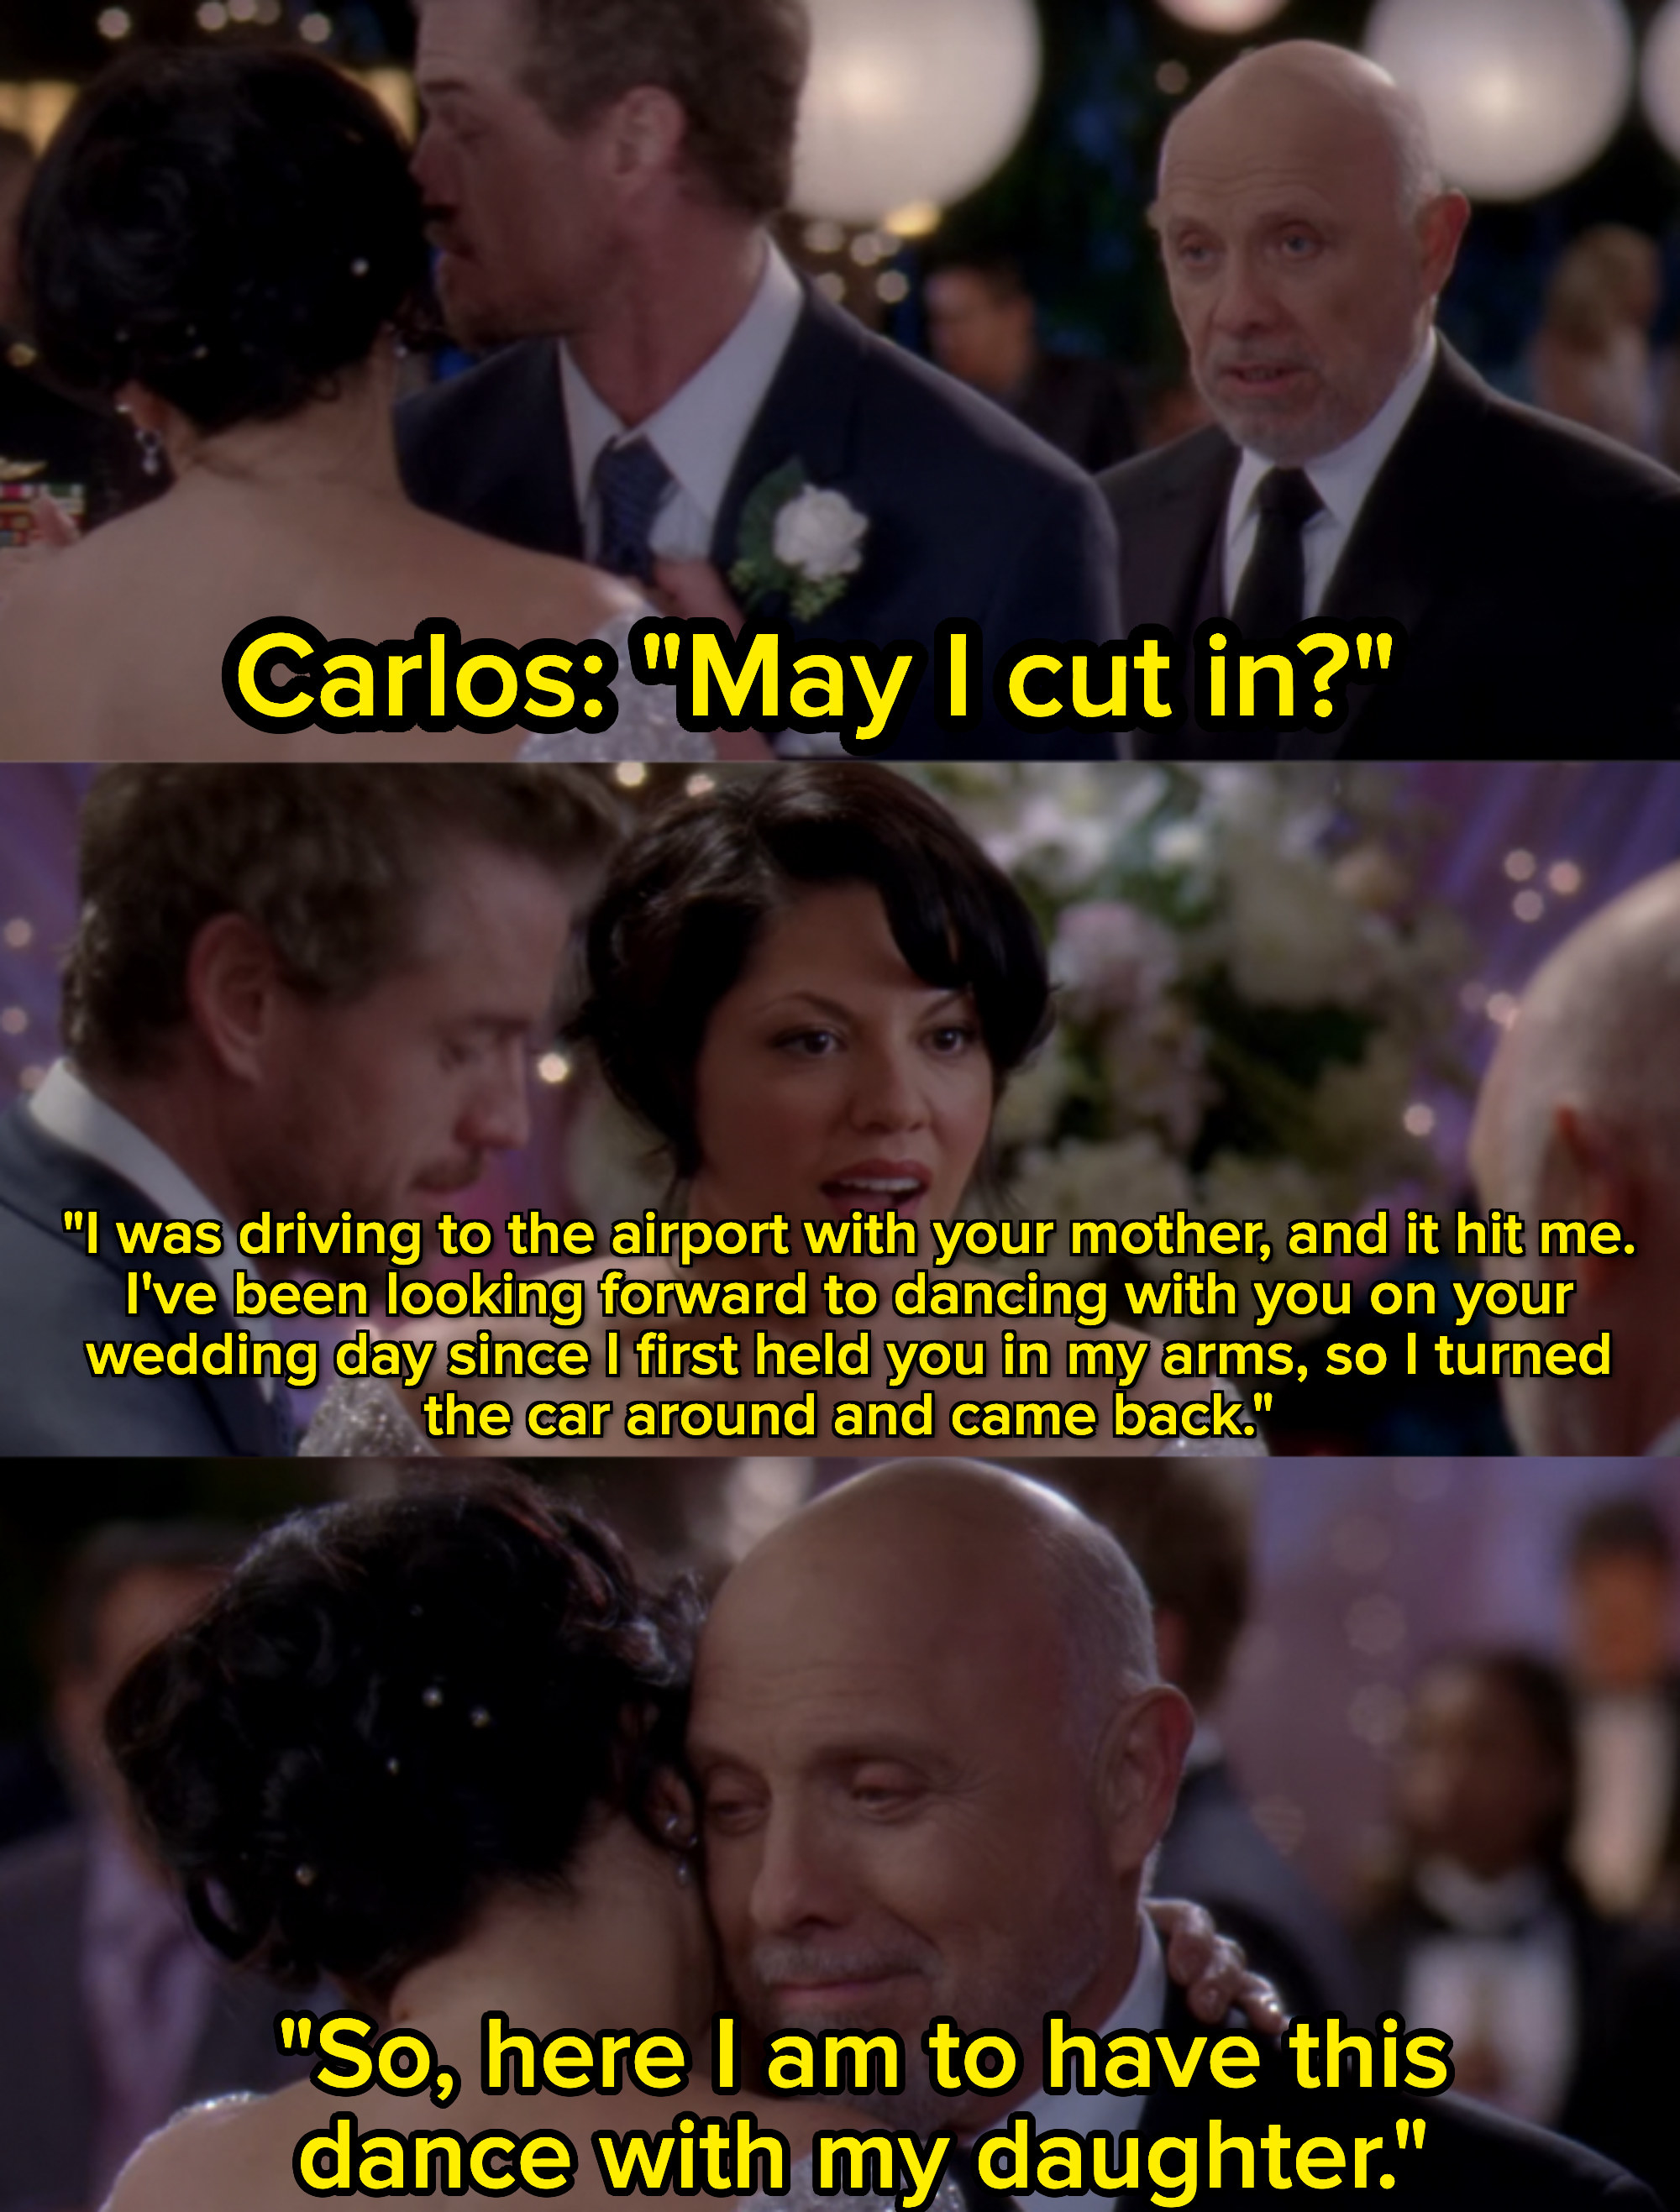 Hector Torres surprises her daughter, Callie, while she dances at her wedding before the two share a dance